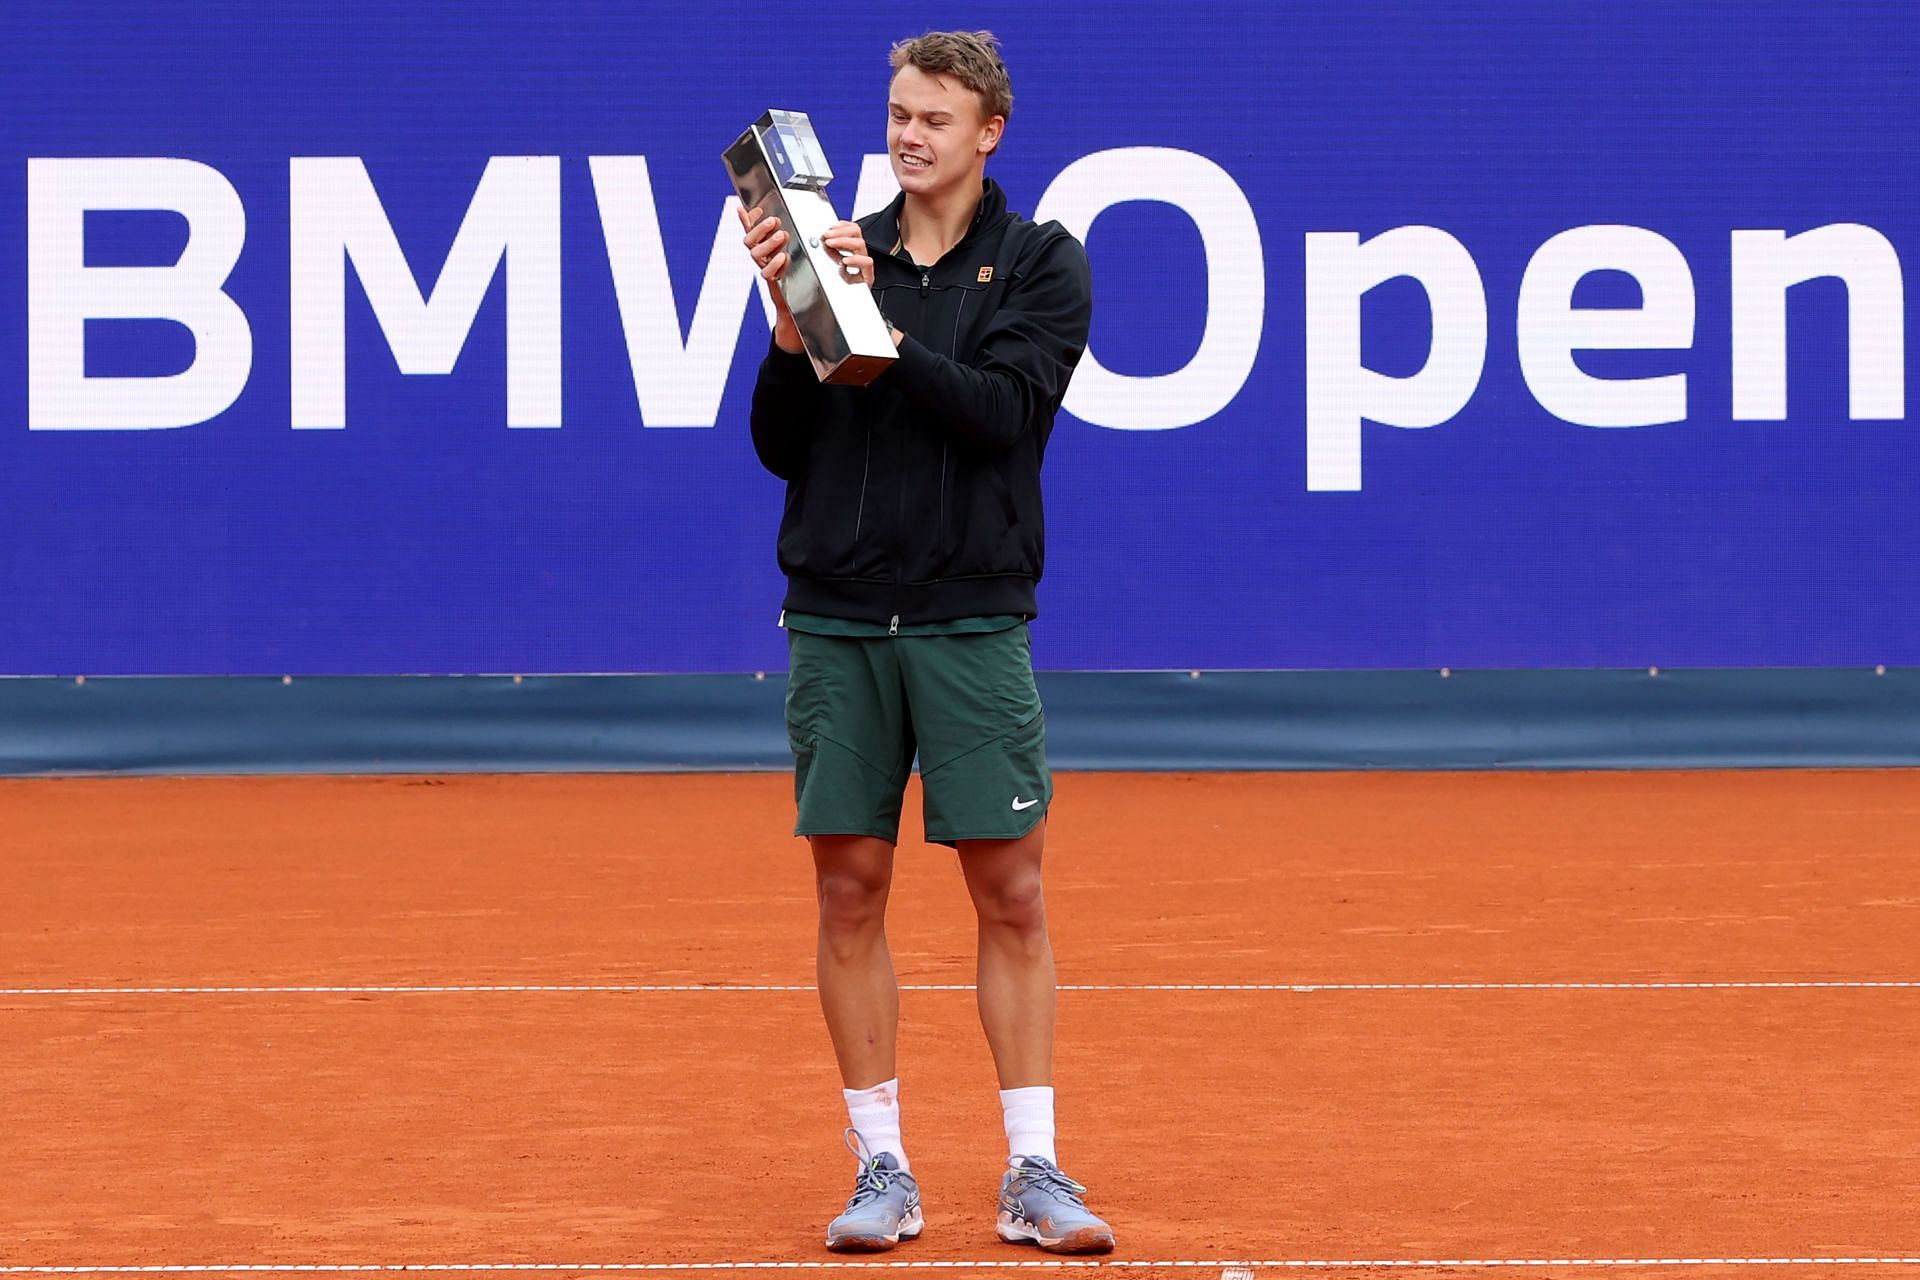 Holger Rune has won two ATP titles so far in 2022